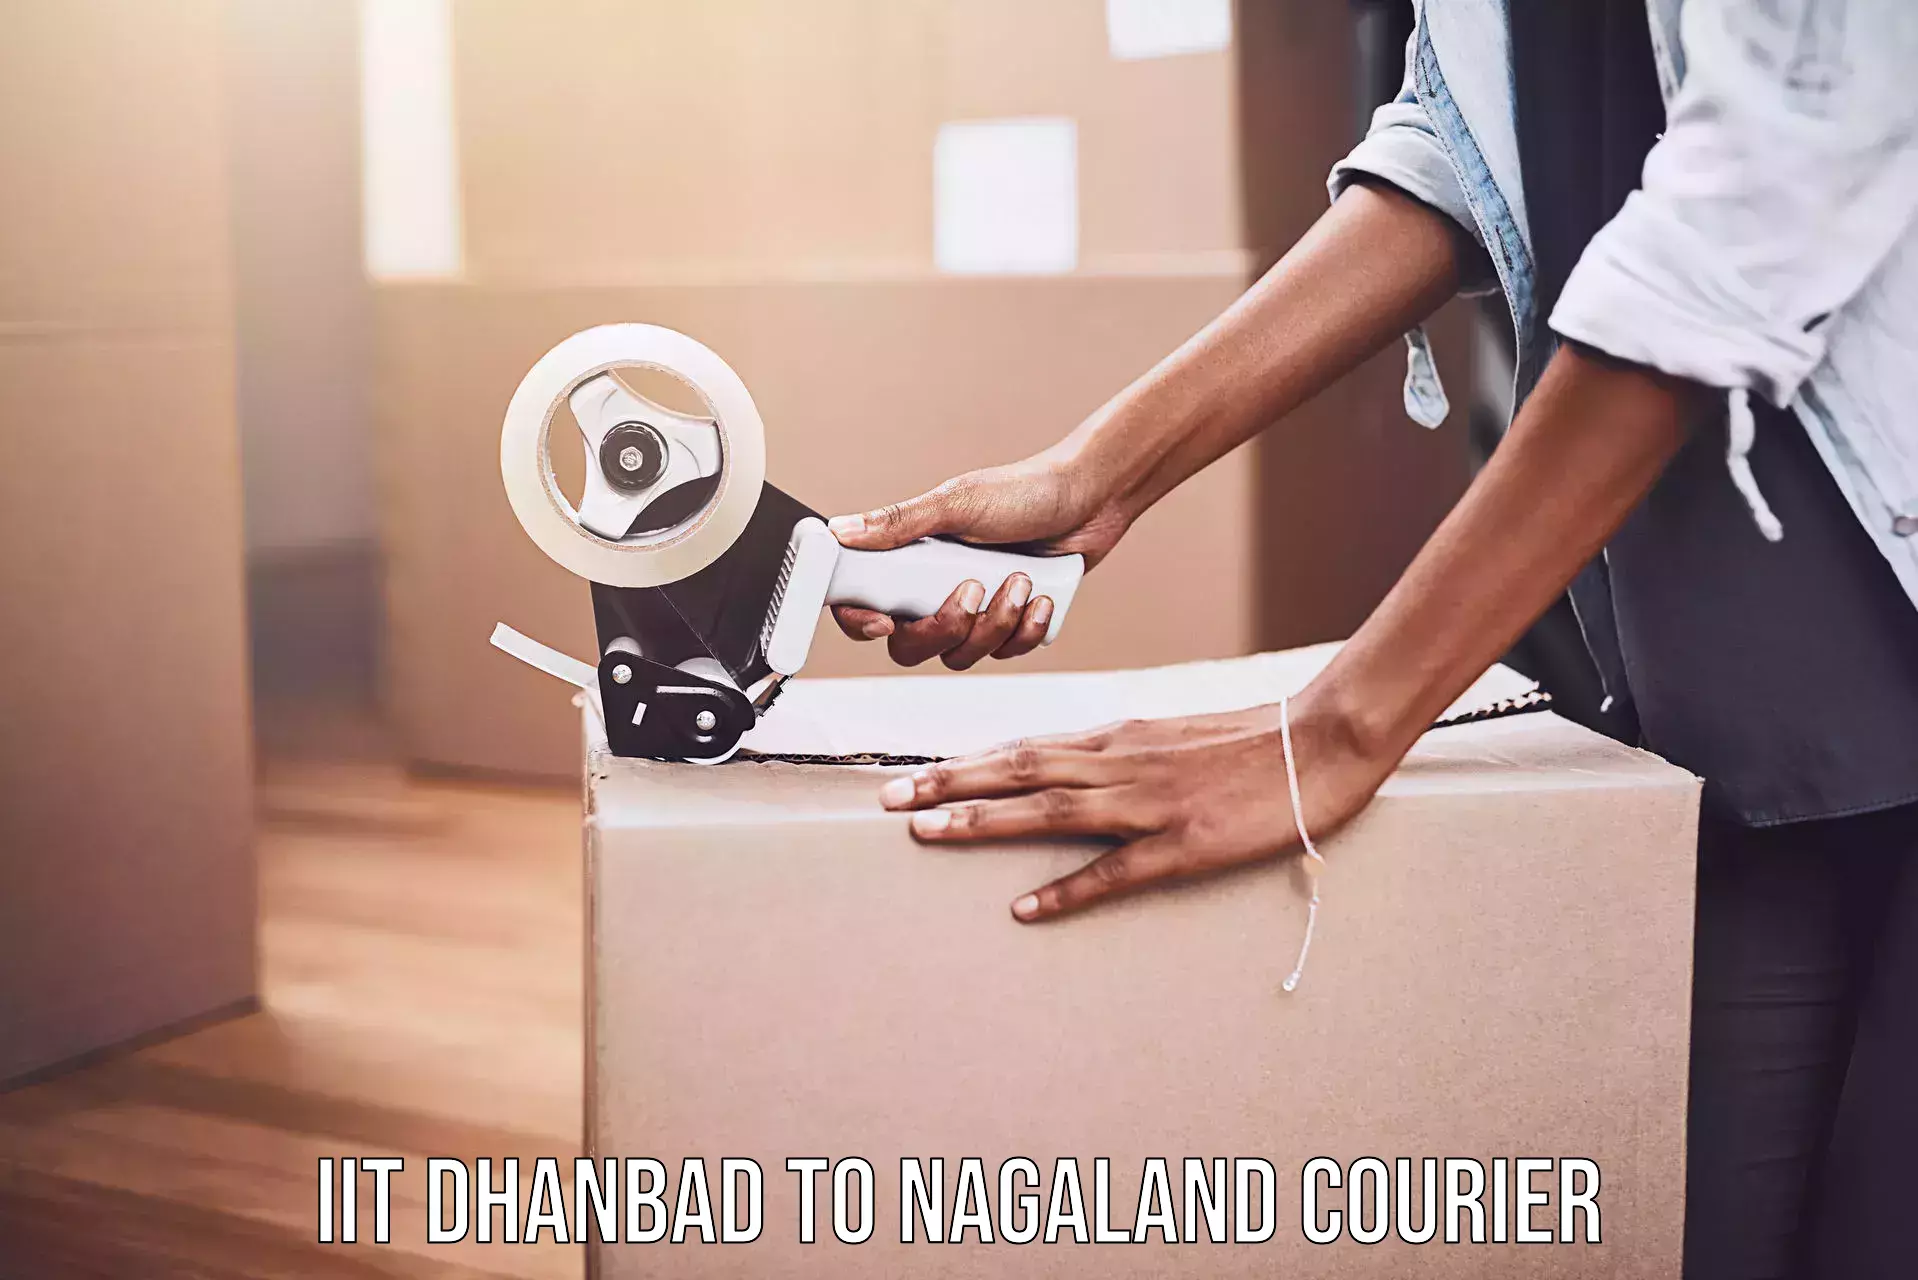 Reliable courier services IIT Dhanbad to Nagaland